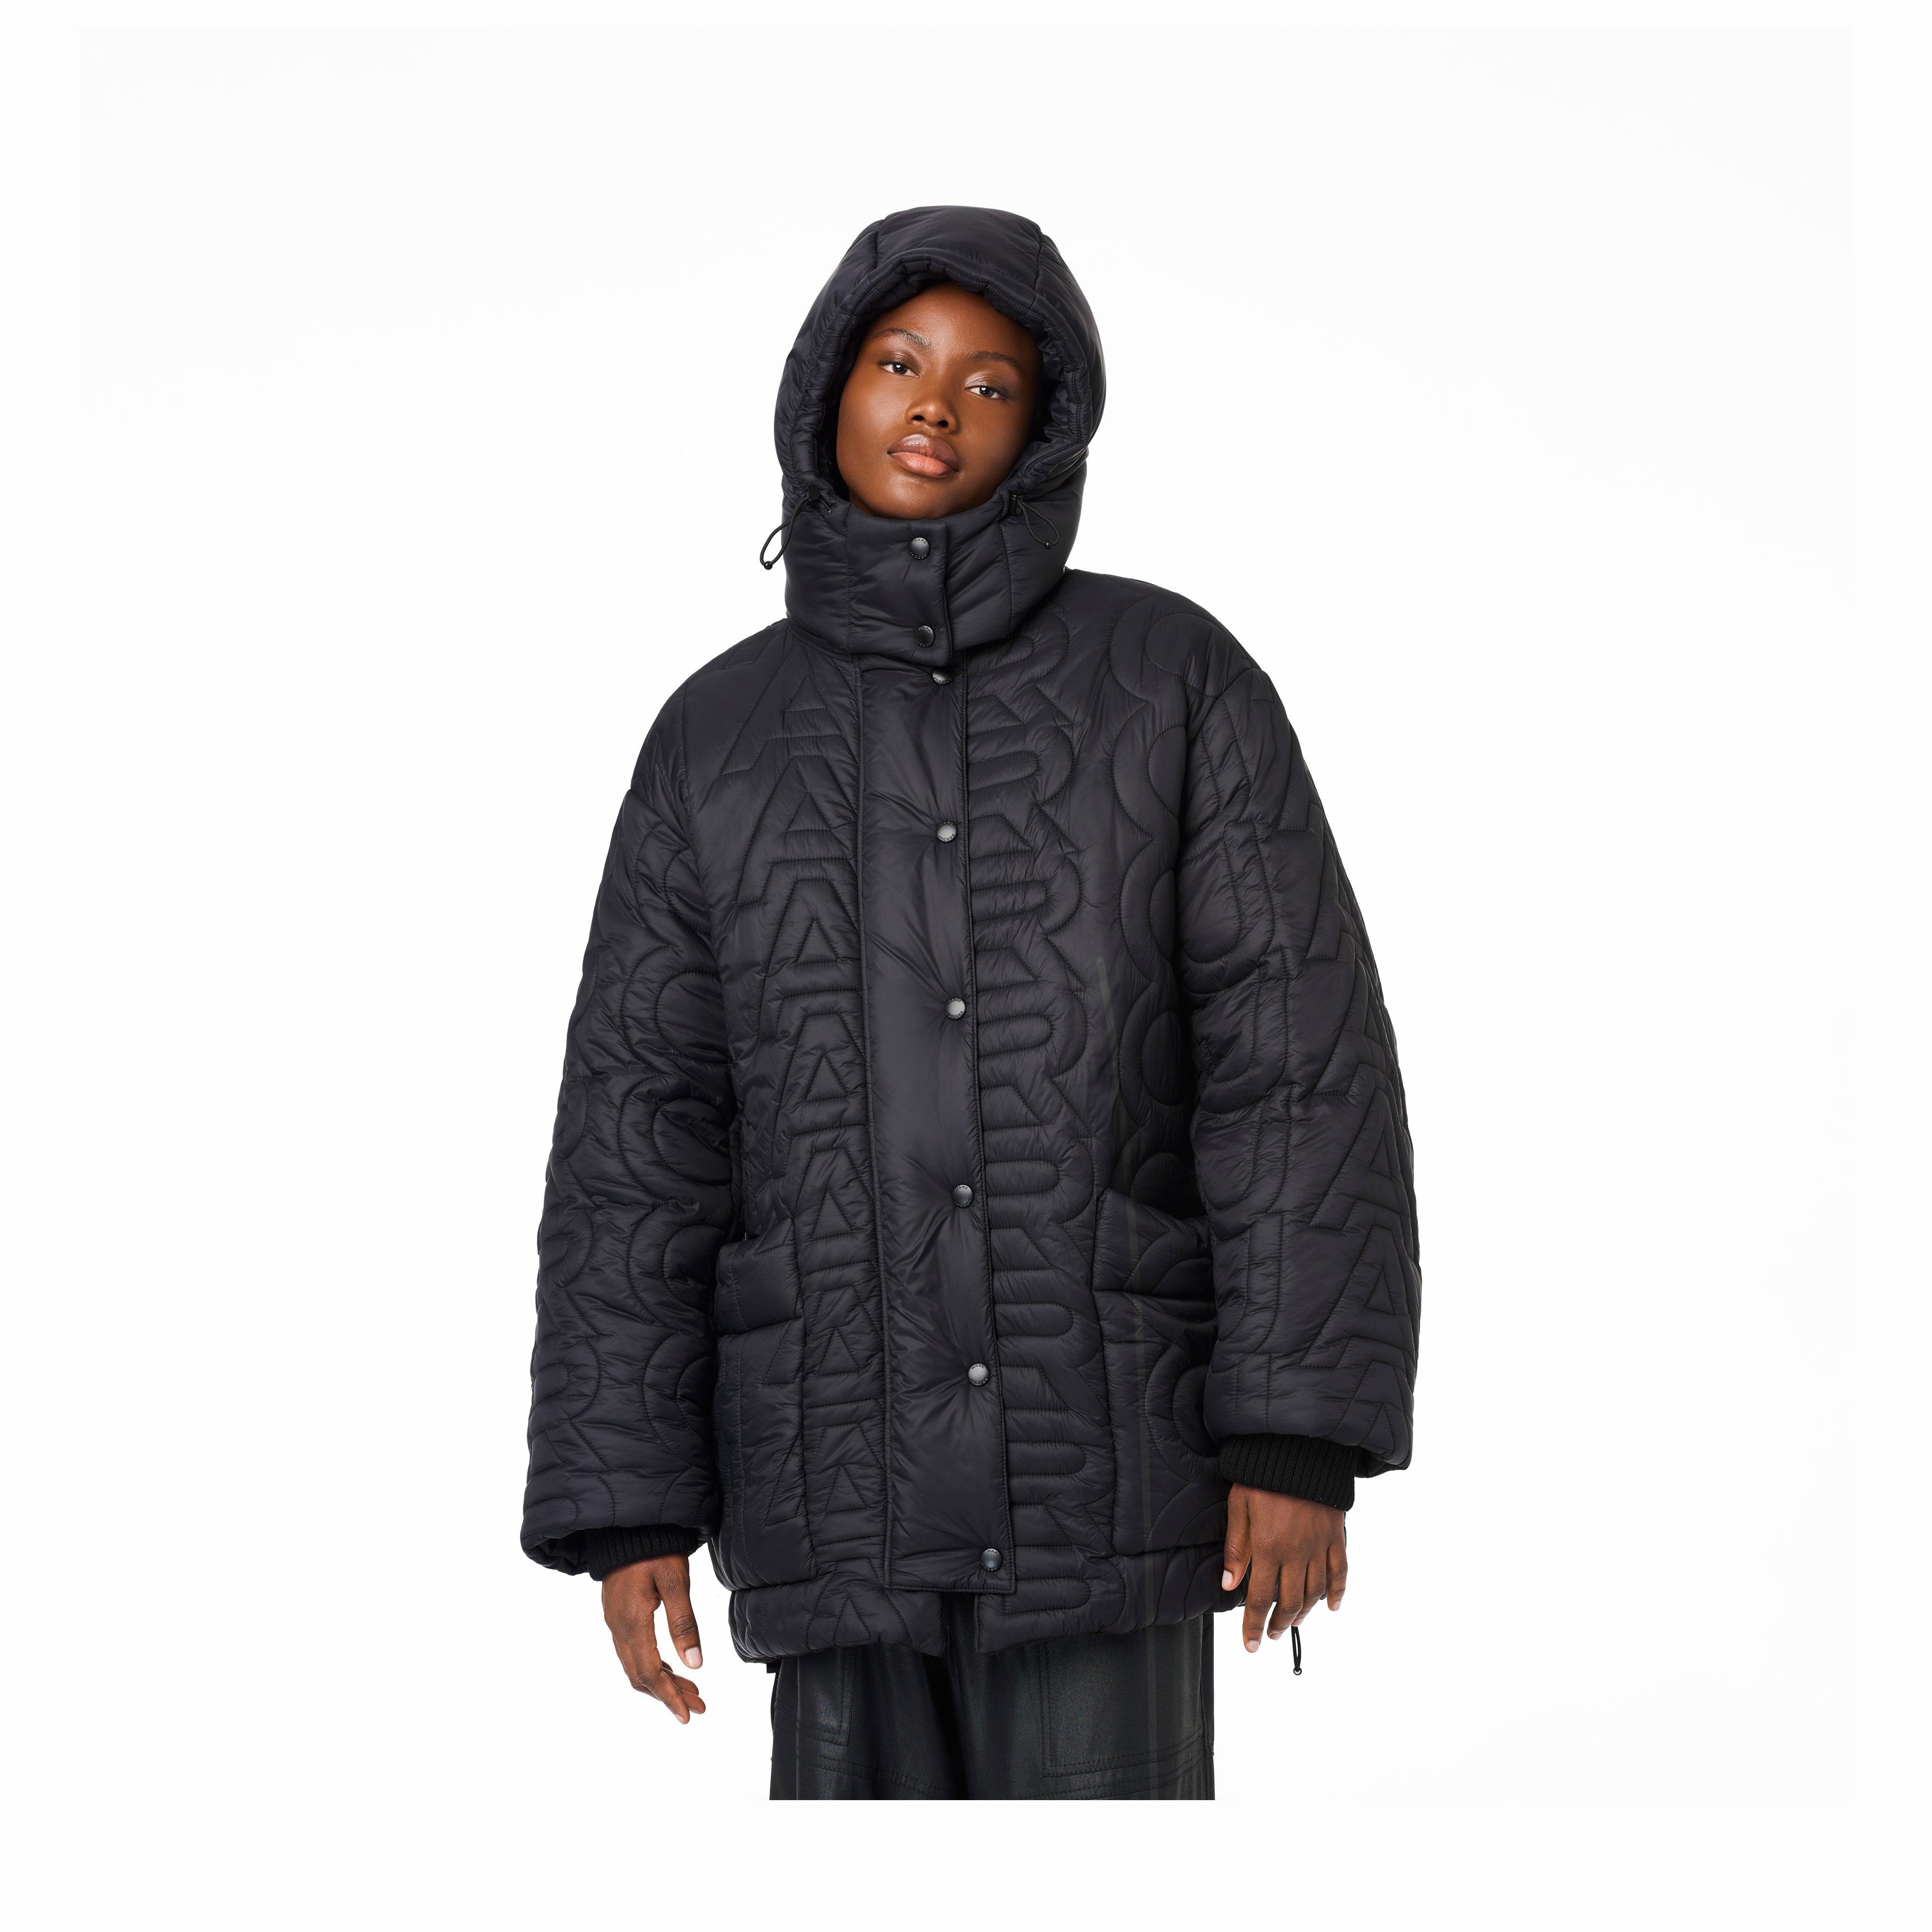 THE MONOGRAM QUILTED PUFFER JACKET - 7